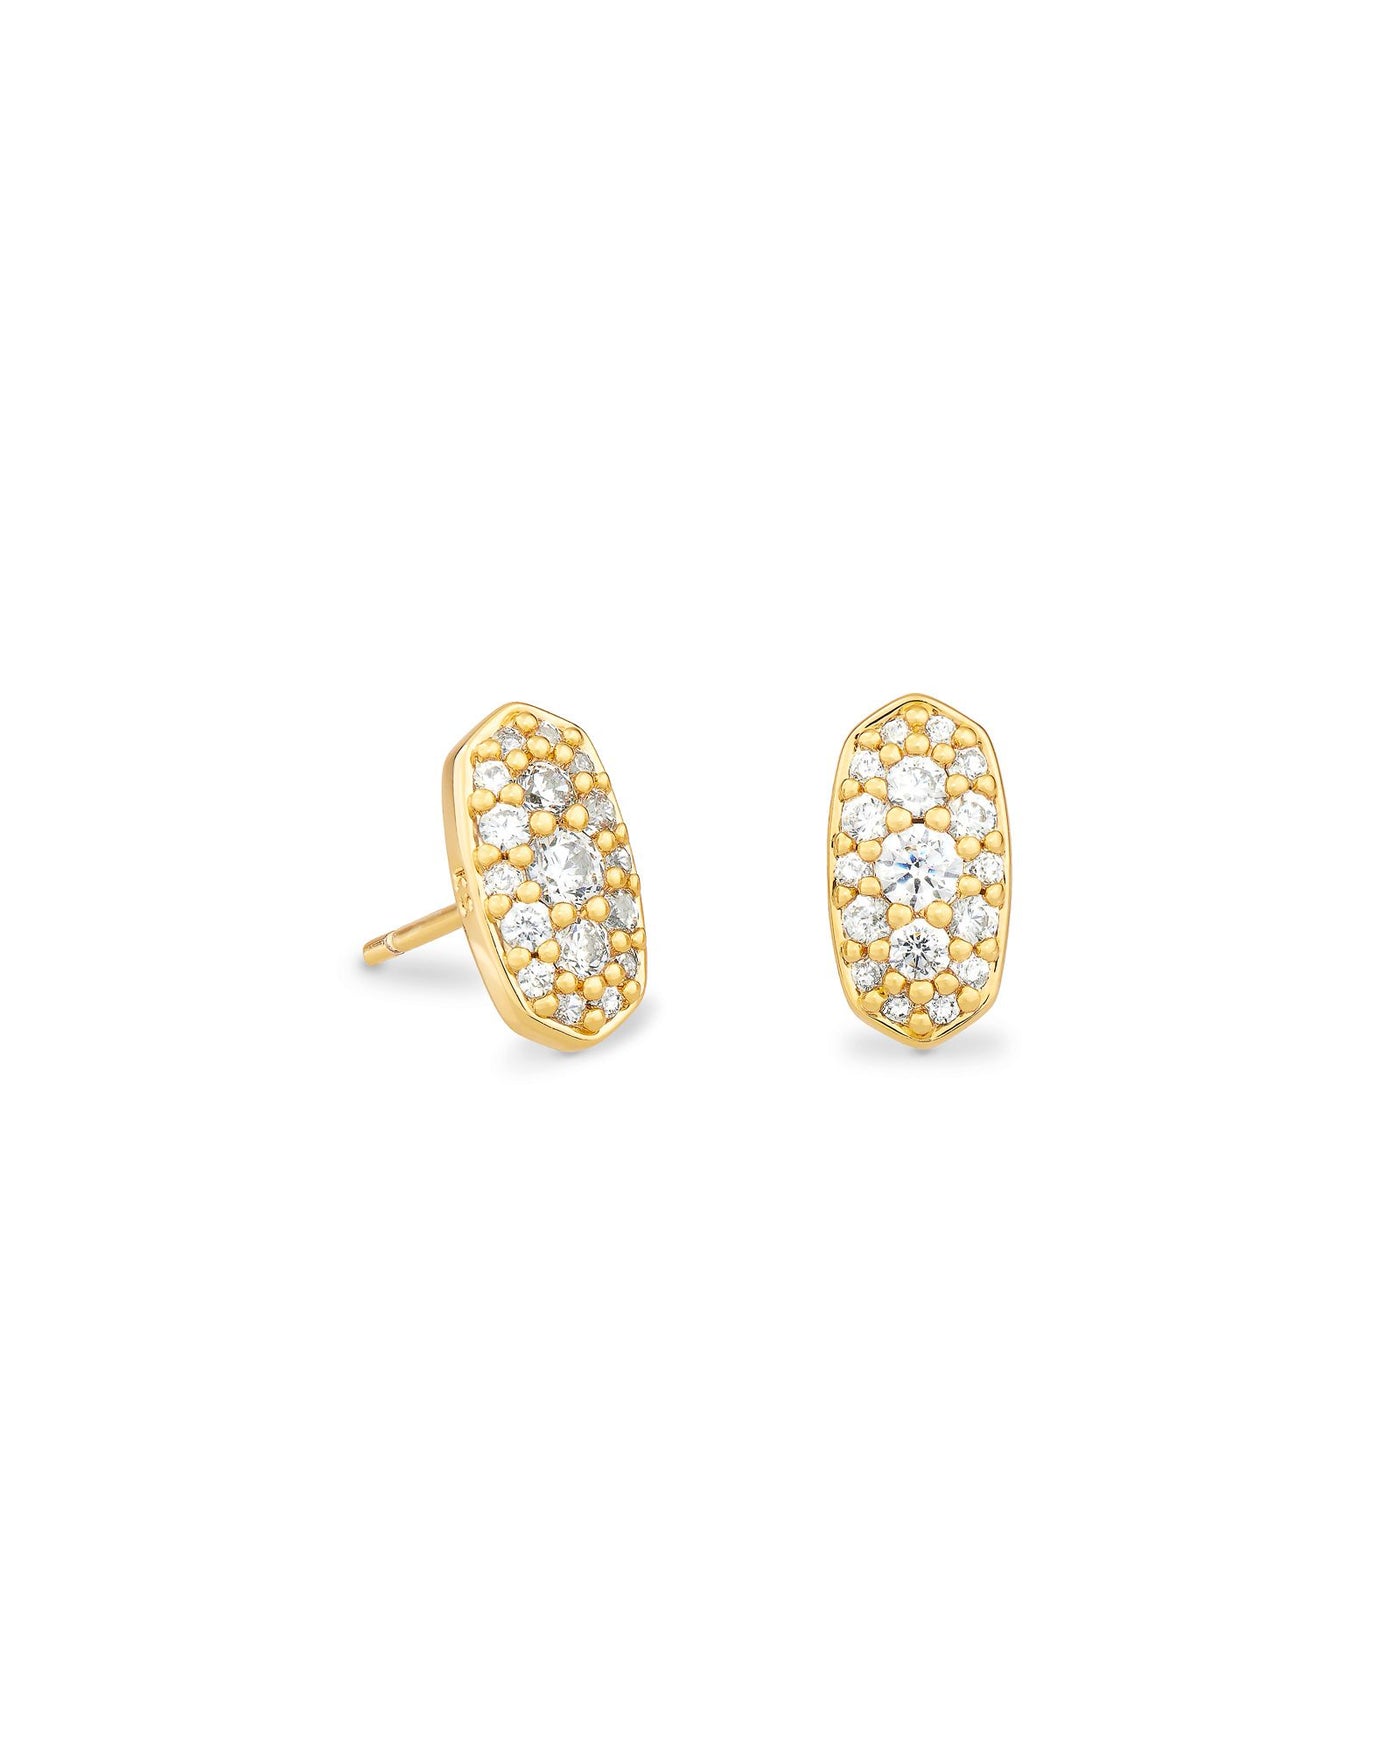 Grayson Crystal Stud Earrings Gold on white background, front view.